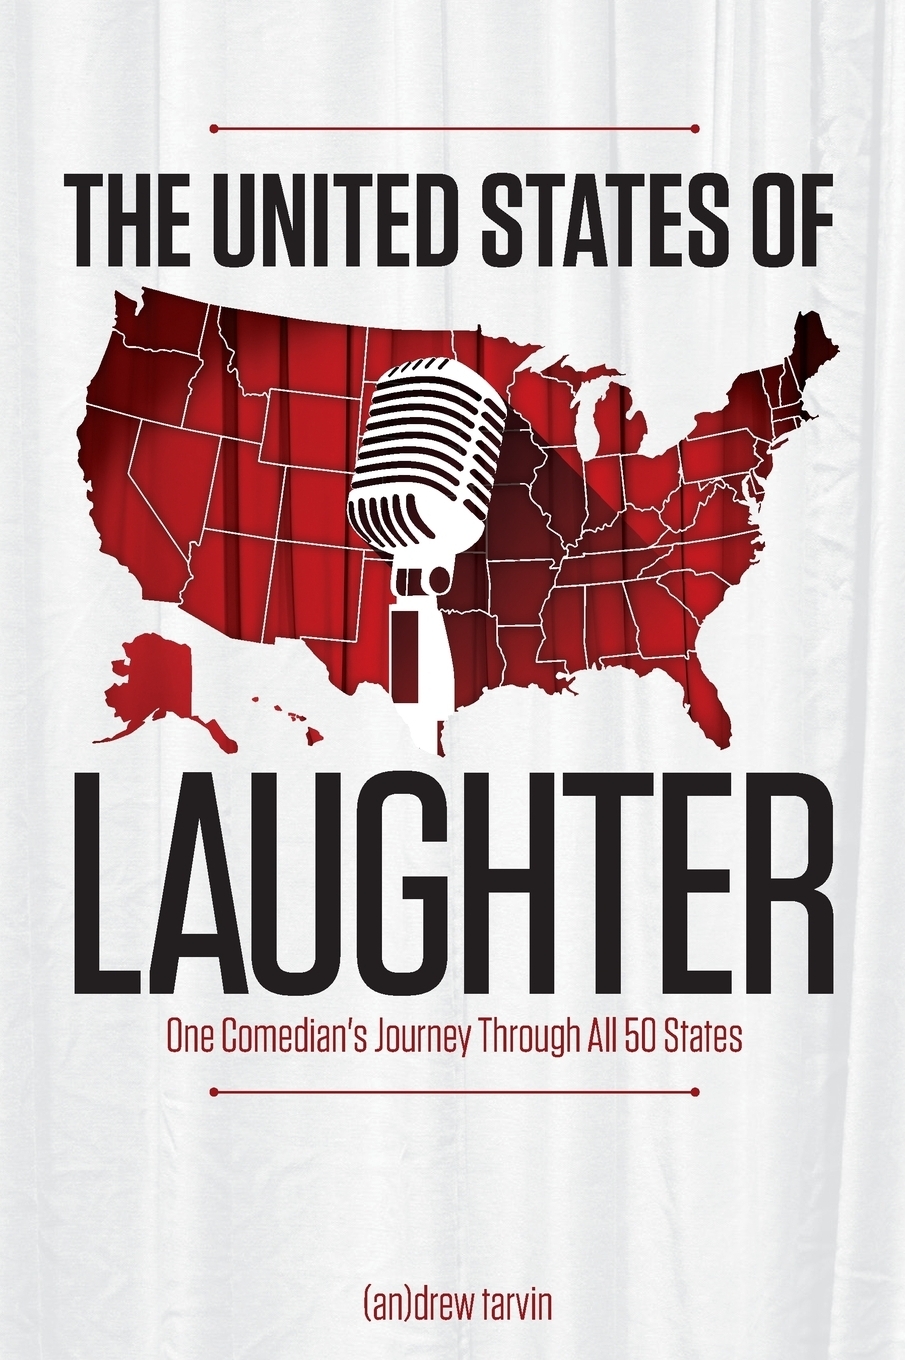 фото The United States of Laughter. One Comedian's Journey Through All 50 States